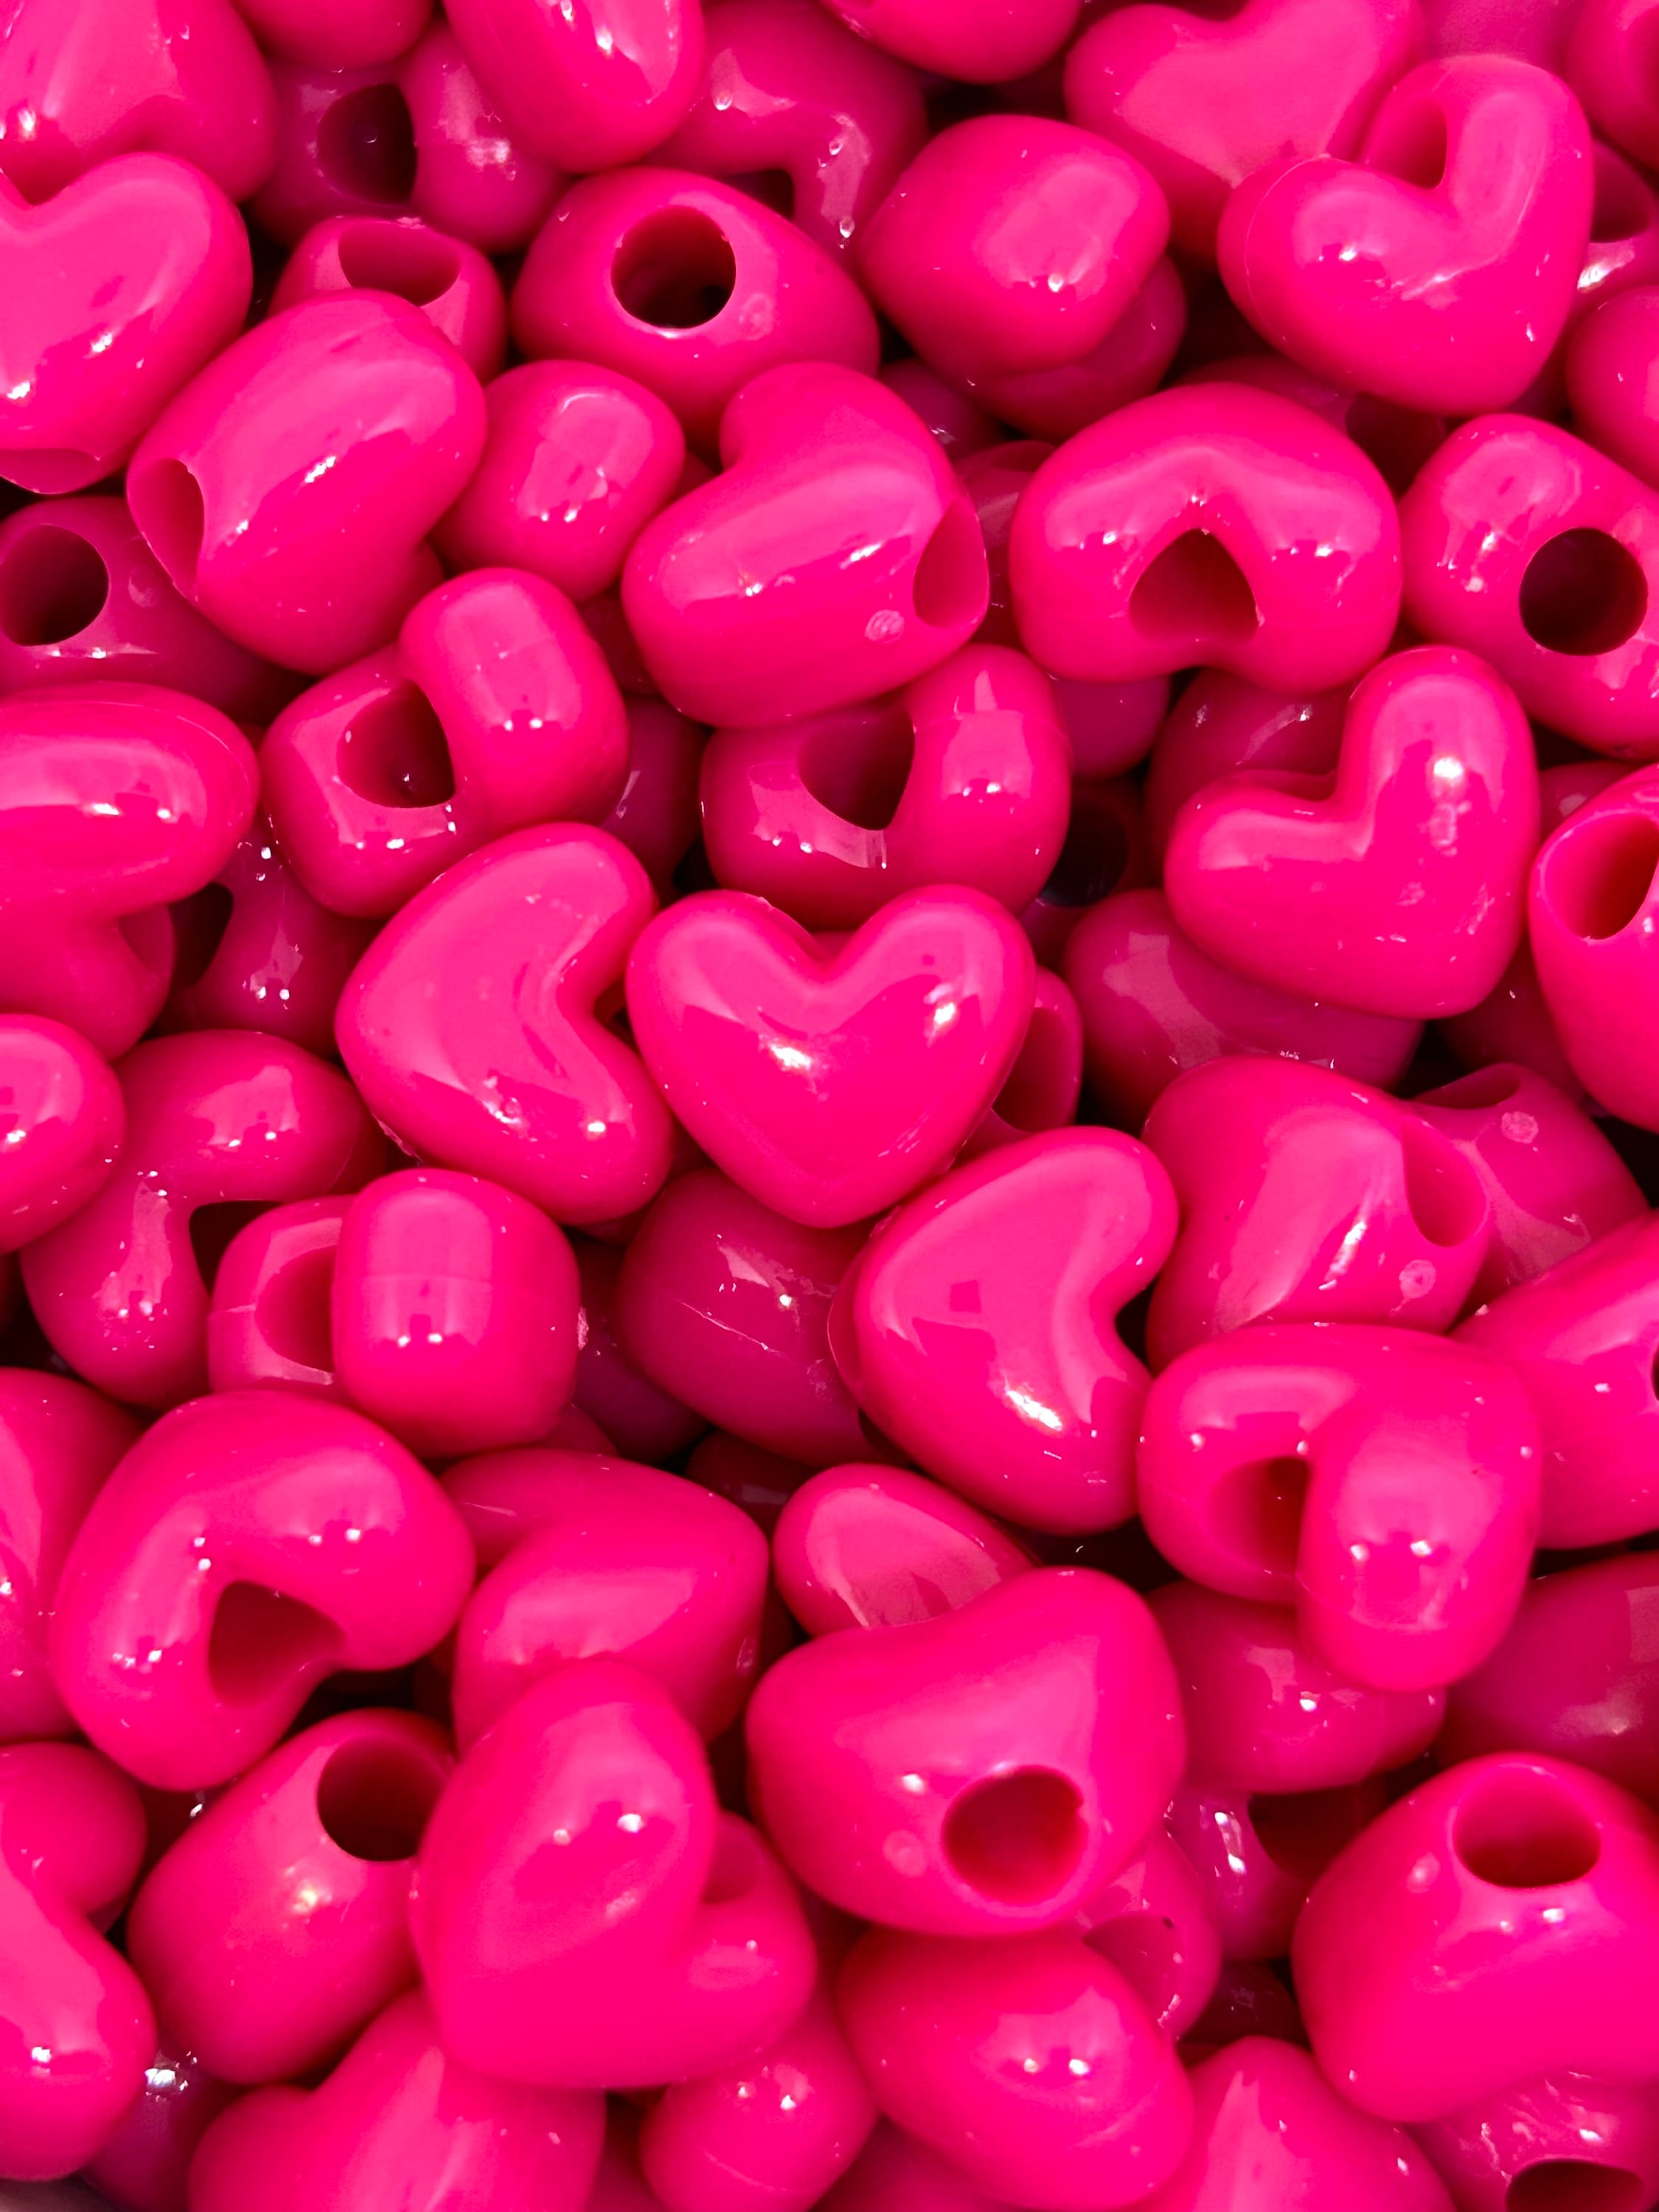 Large Pink Heart Pony Beads